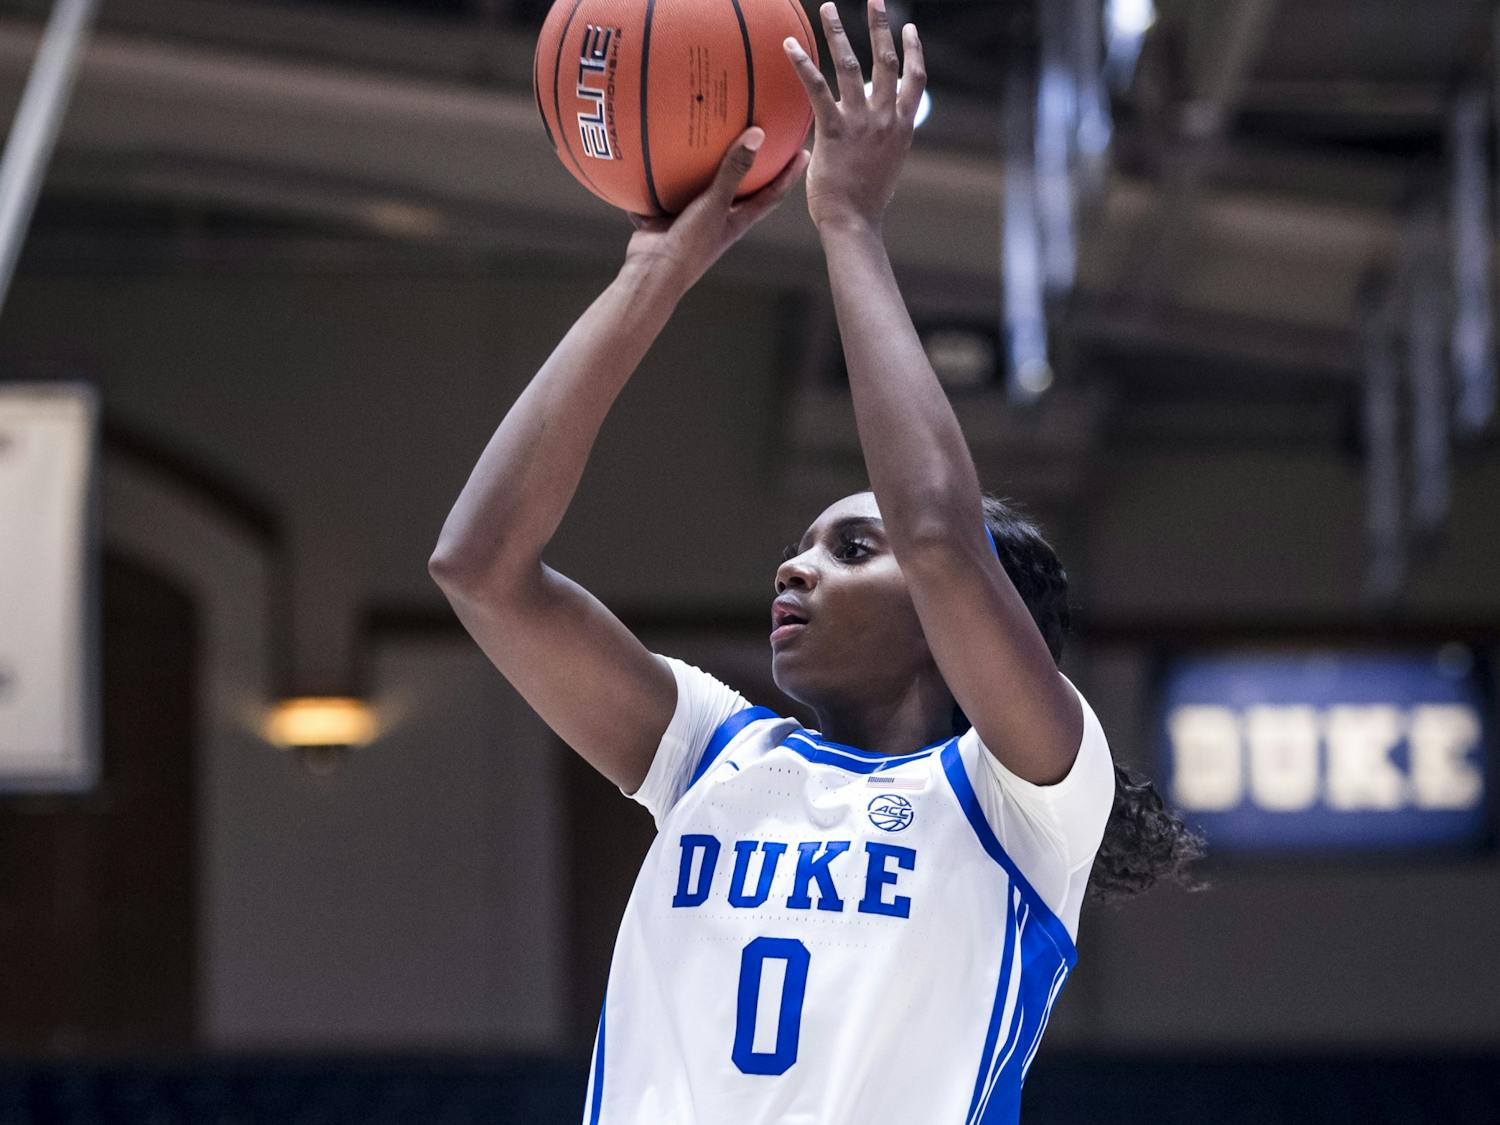 Sophomore Jaida Patrick notched a career-high 21 points as Duke cruised past Longwood.